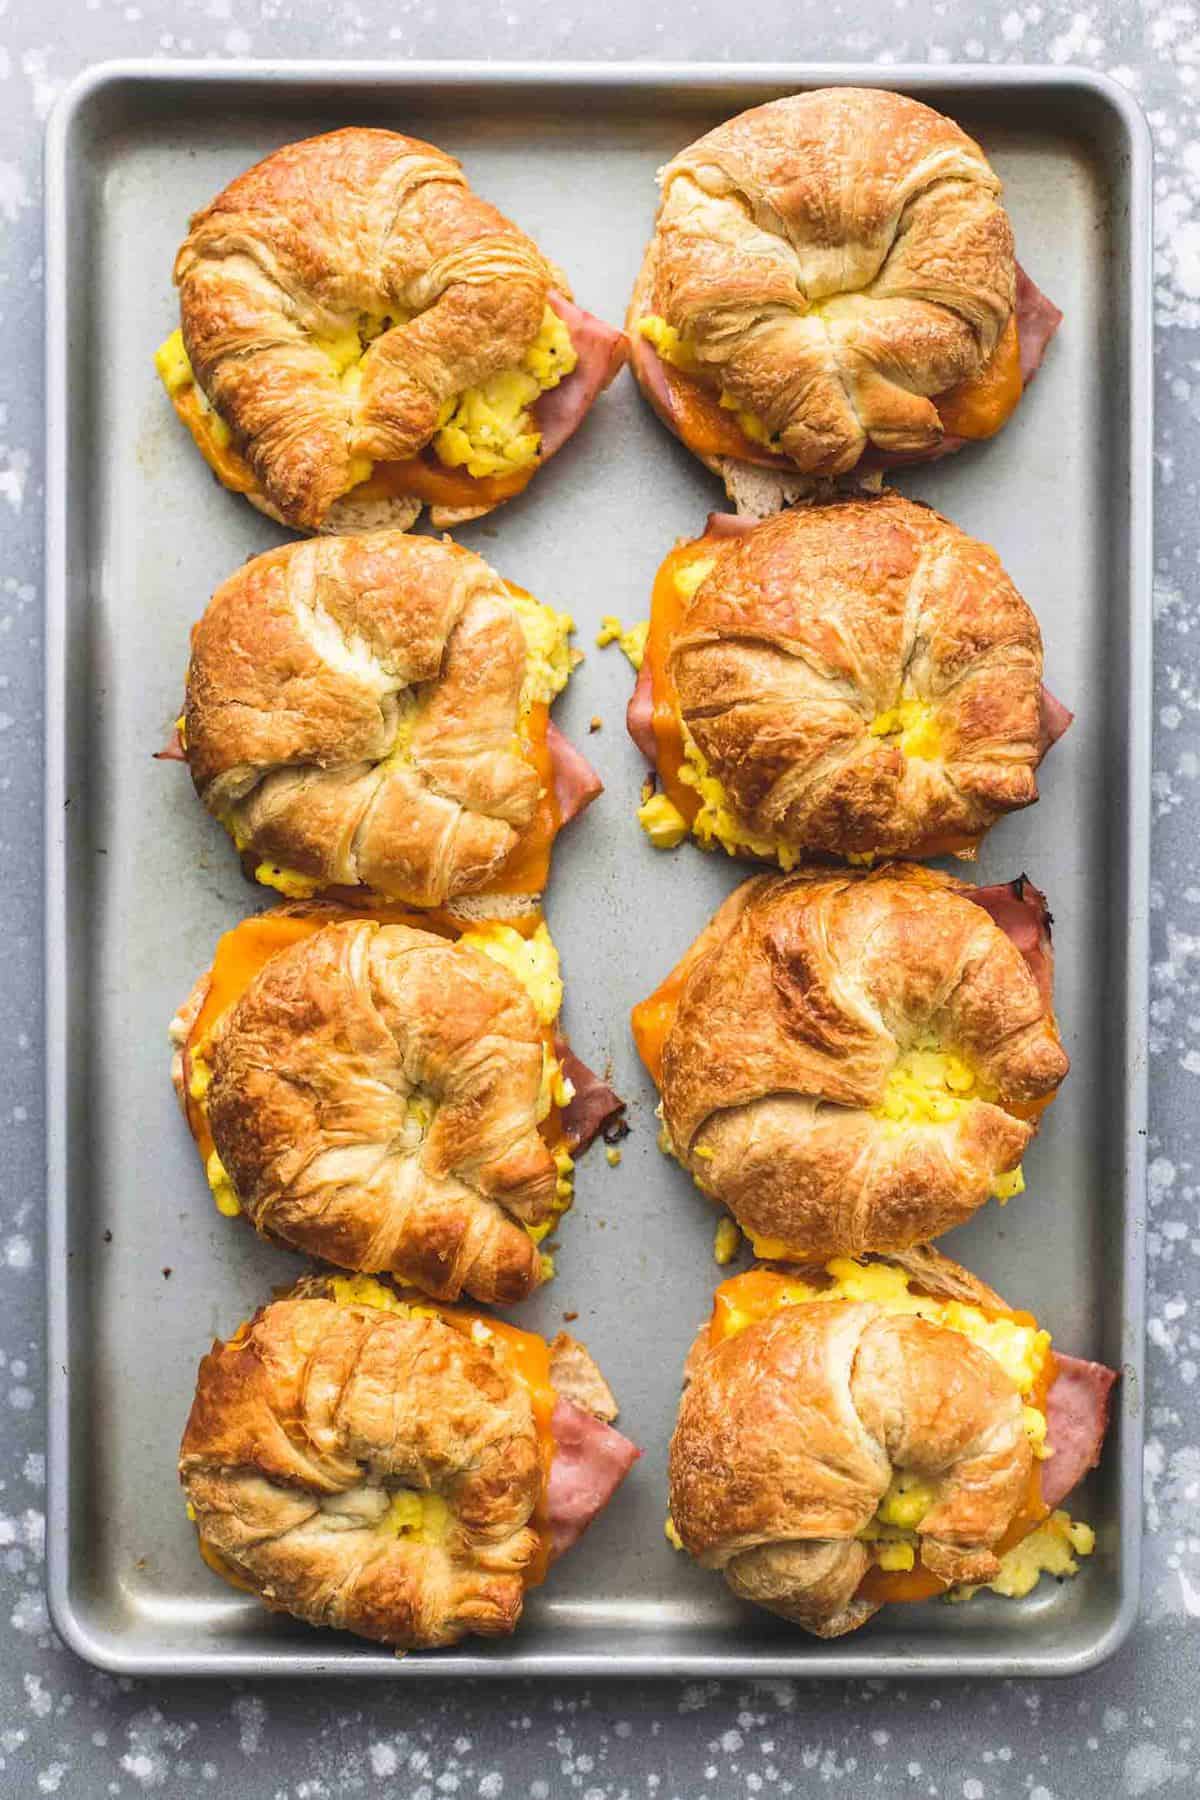 top view of baked croissant breakfast sandwiches on a baking sheet.